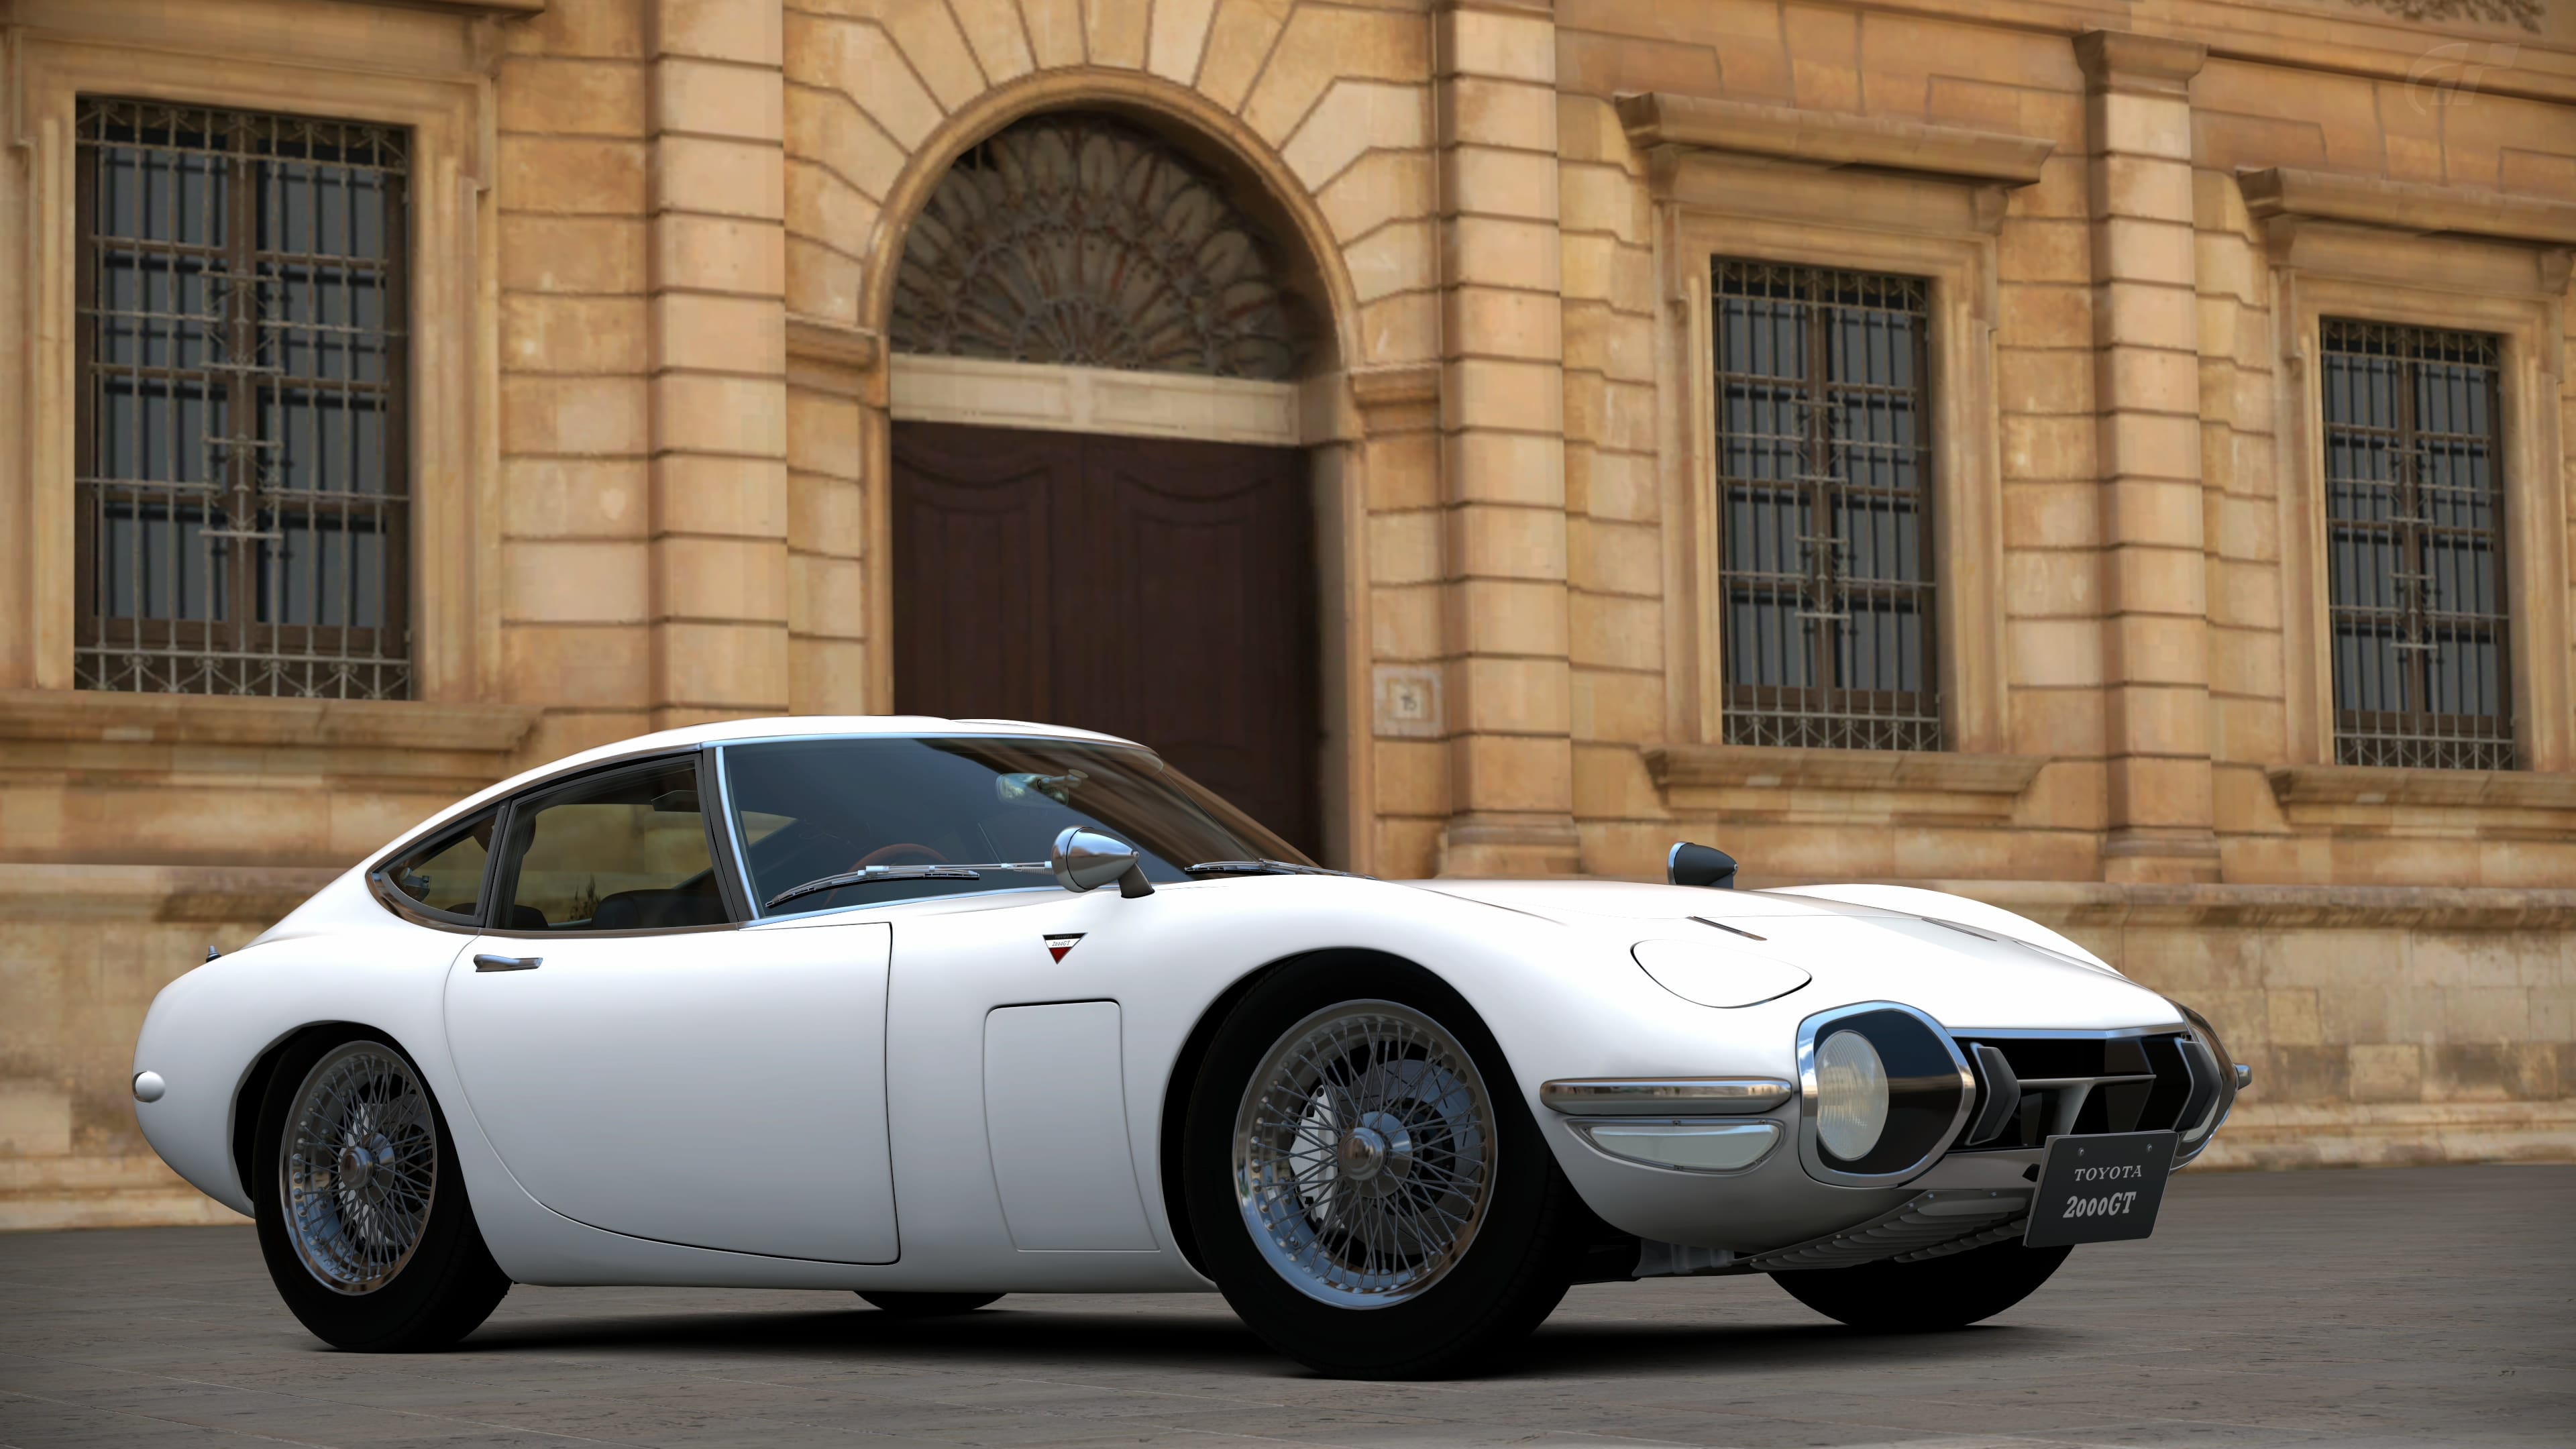 1967 Toyota 2000gt Wallpapers Hd - Gran Turismo 6 Toyota 2000gt , HD Wallpaper & Backgrounds